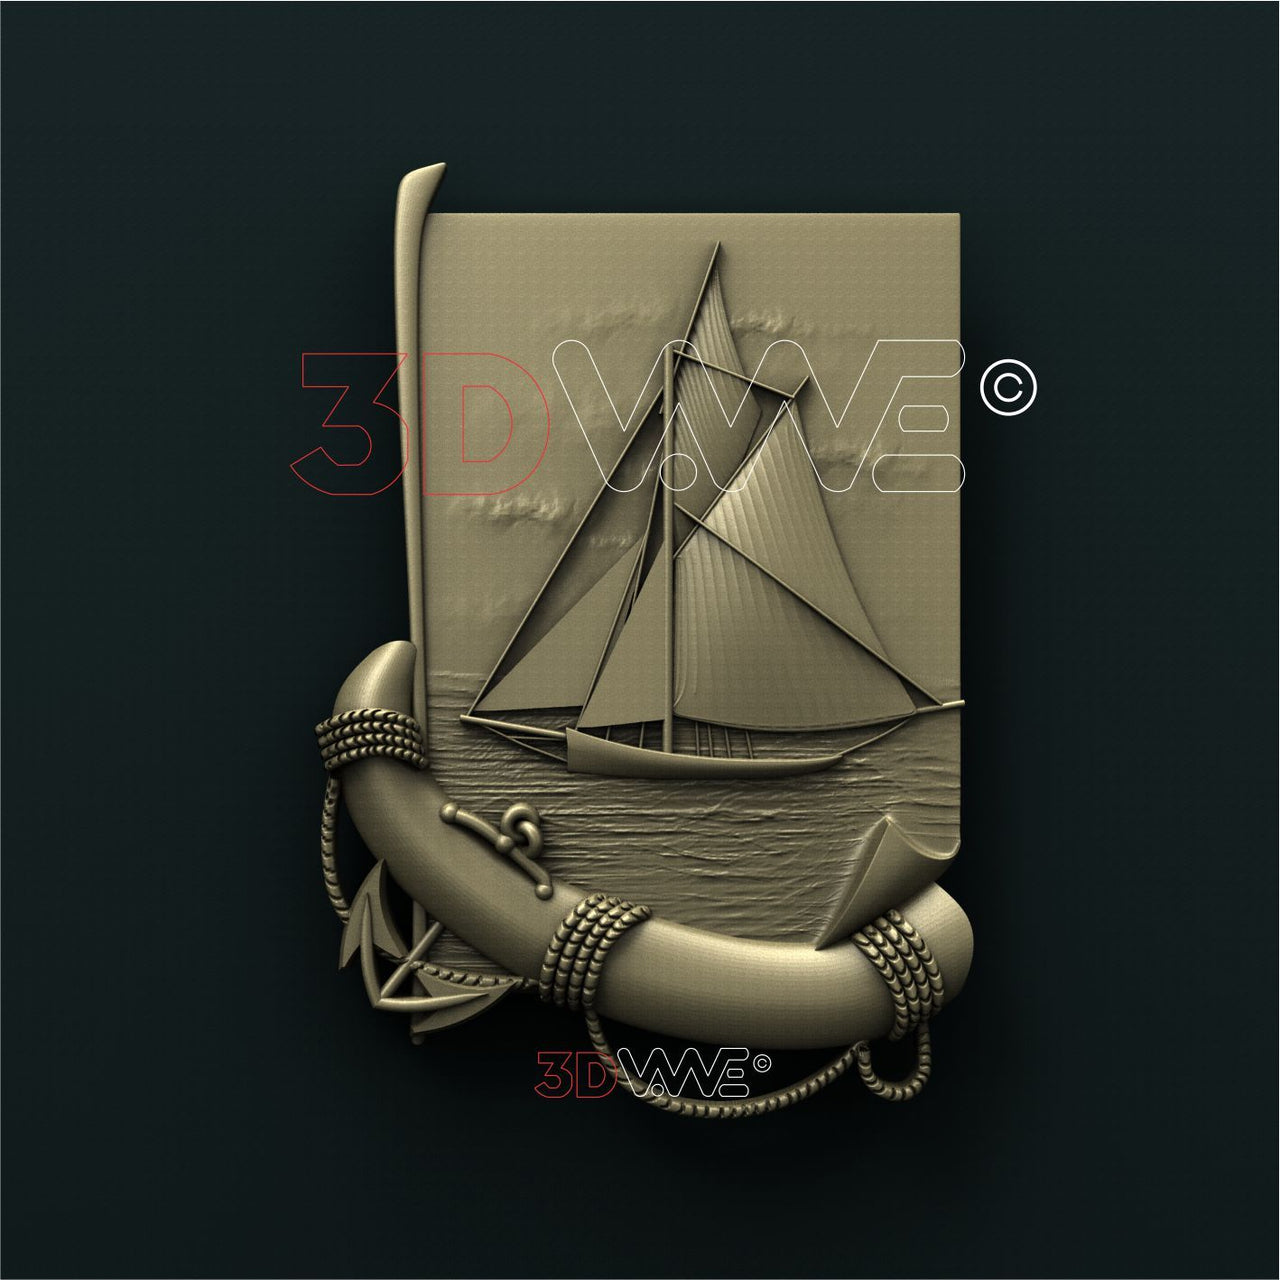 SHIP AND ANCHOR 3D STL 3DWave